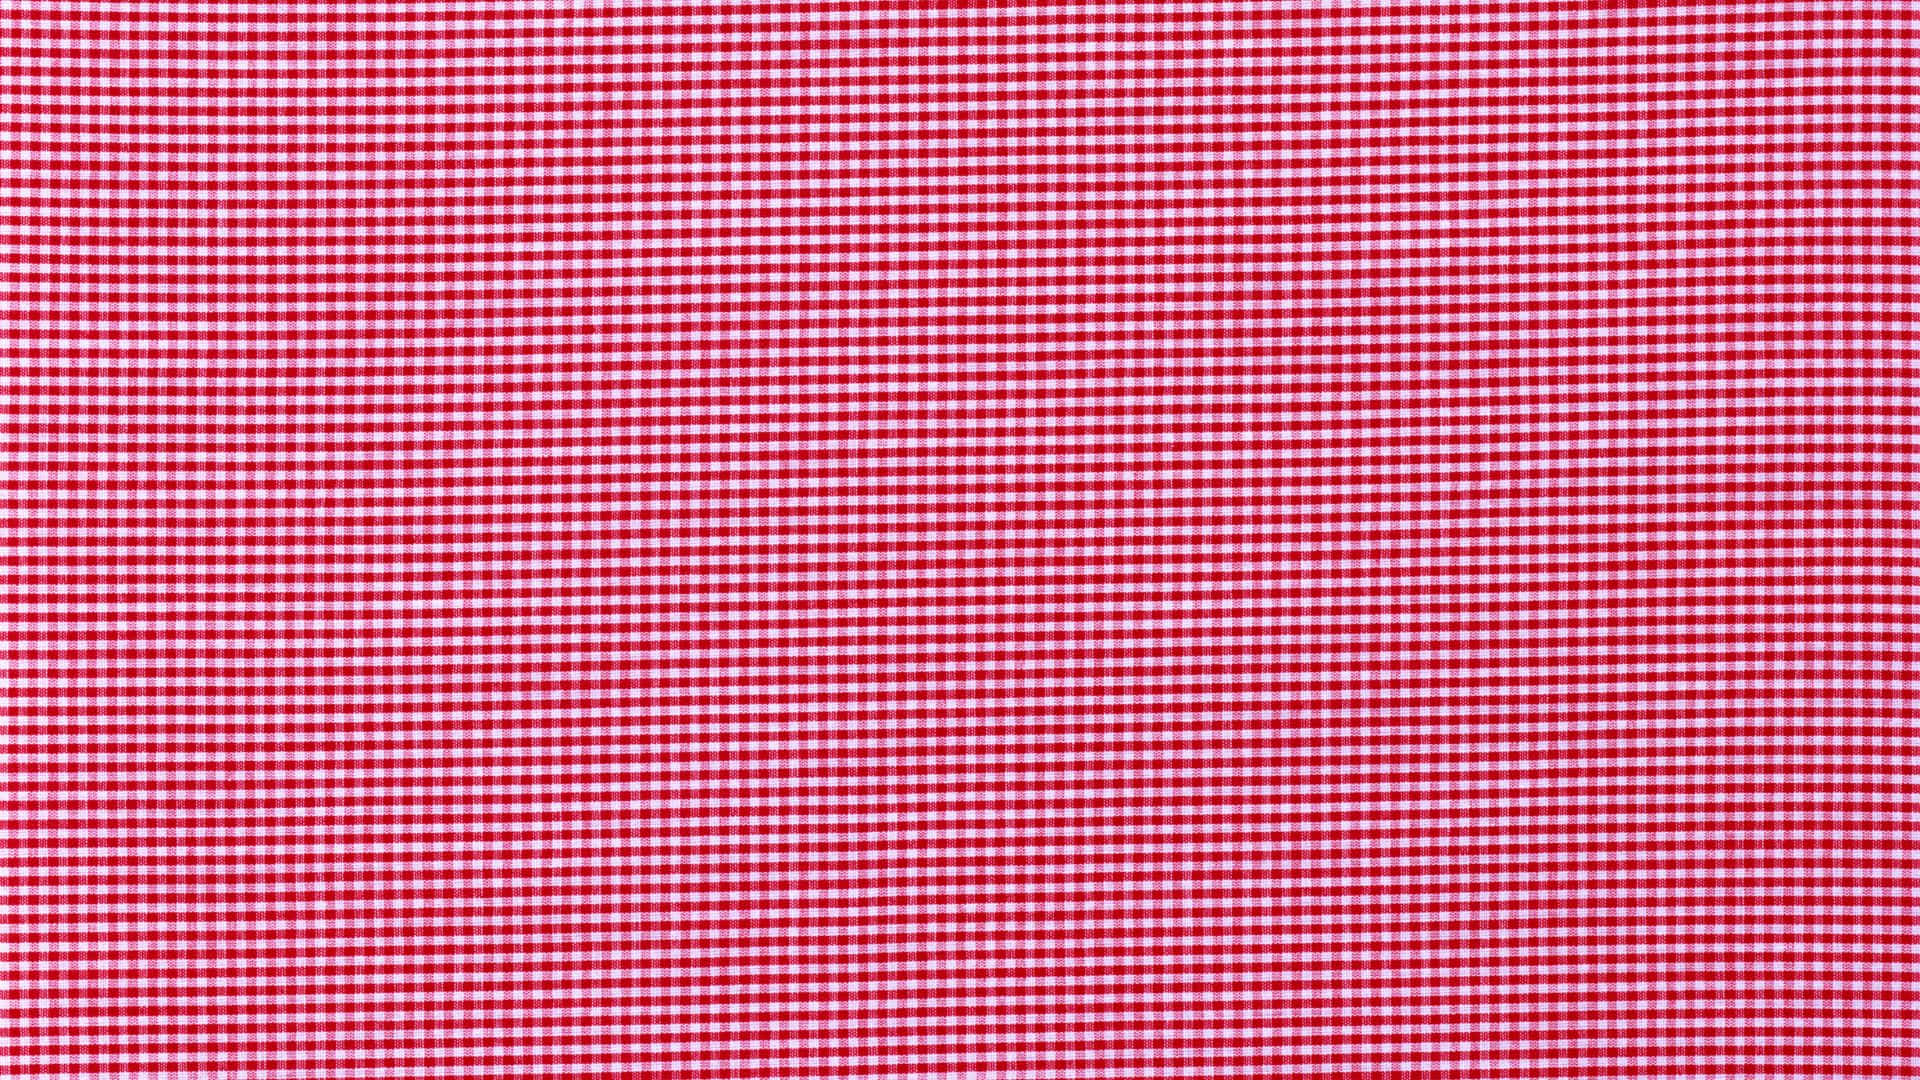 Charming Pink Checkered Background Wallpaper